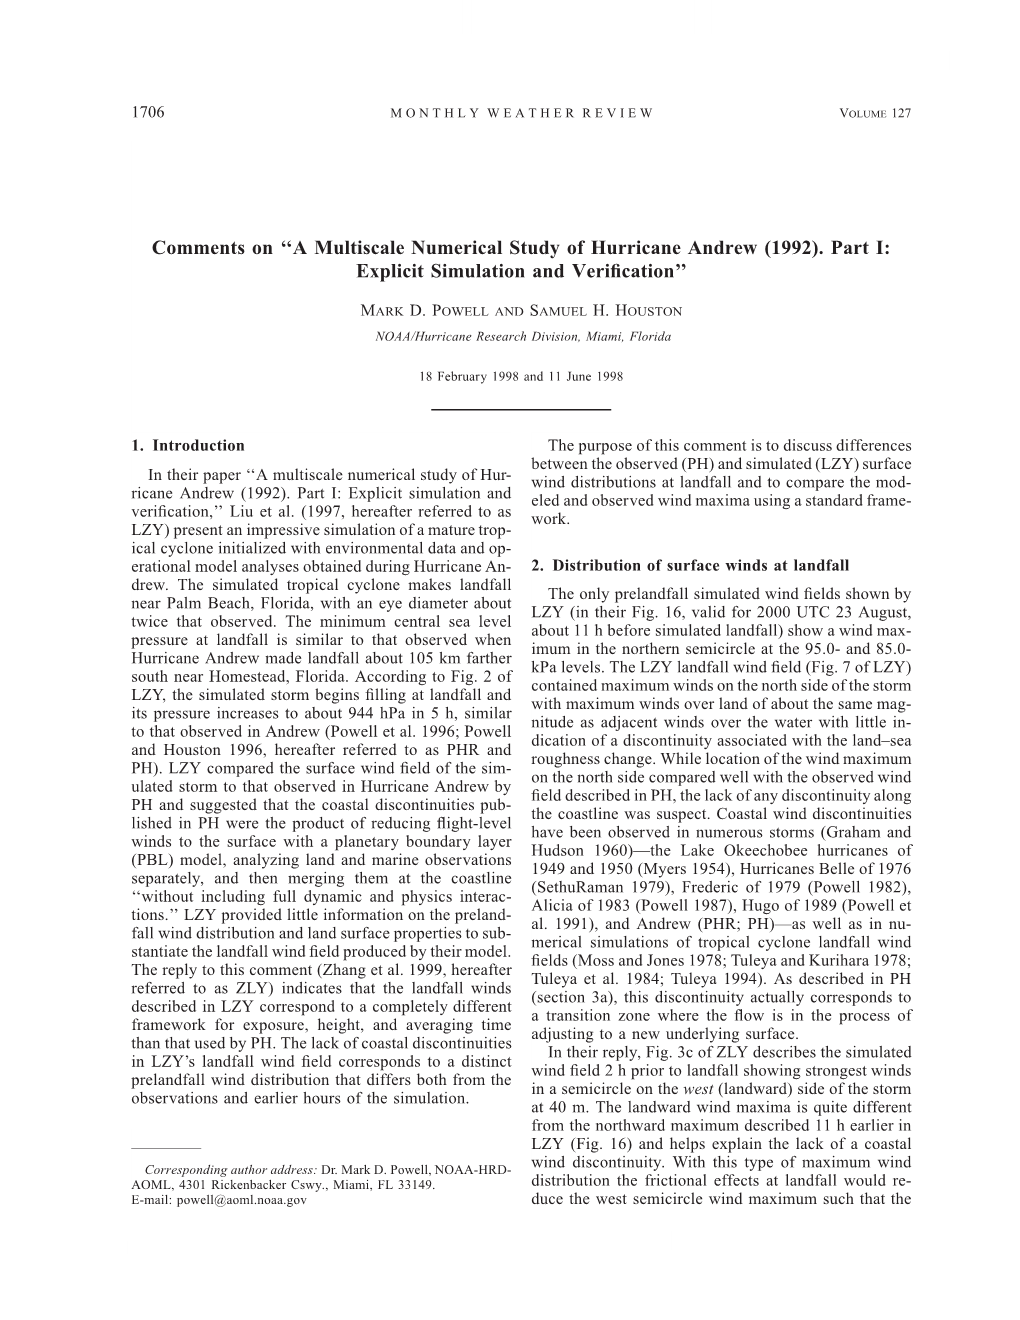 A Multiscale Numerical Study of Hurricane Andrew (1992). Part I: Explicit Simulation and Veri®Cation''